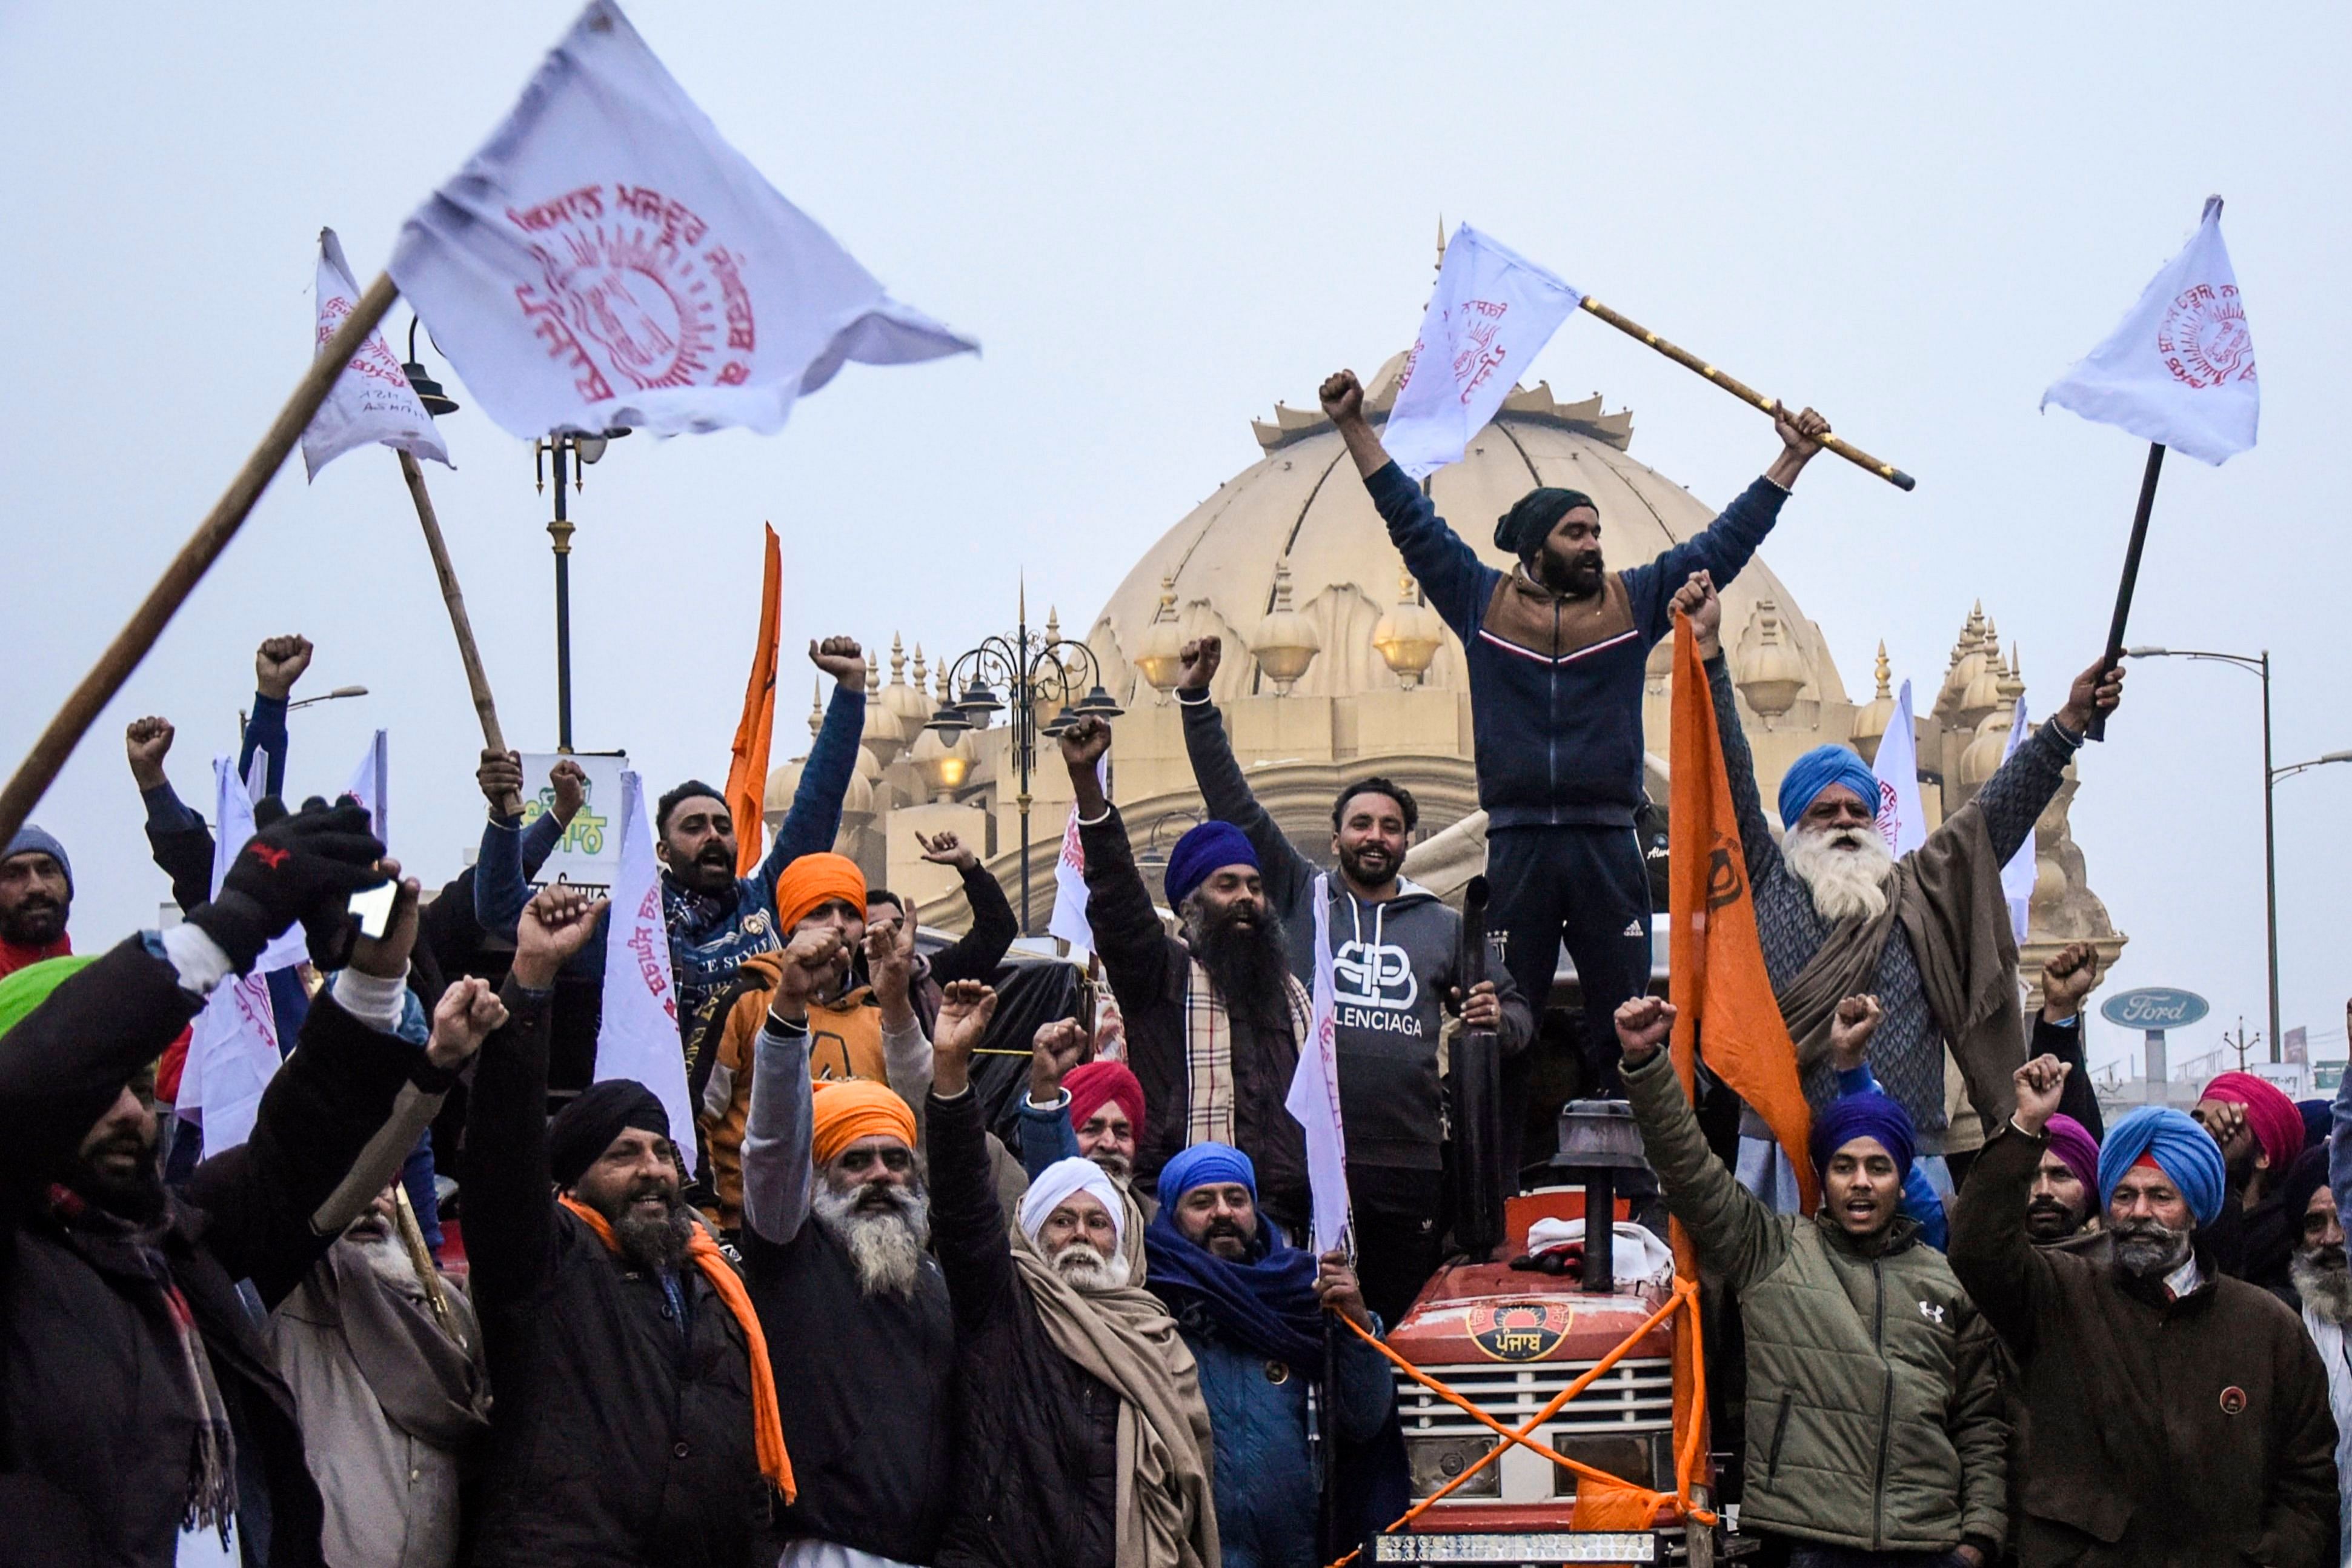 Farmers shout slogans as they depart for Delhi to participate in a continuing demonstration against the central government's recent agricultural reforms in Amritsar on January 12, 2021. Credit: AFP Photo